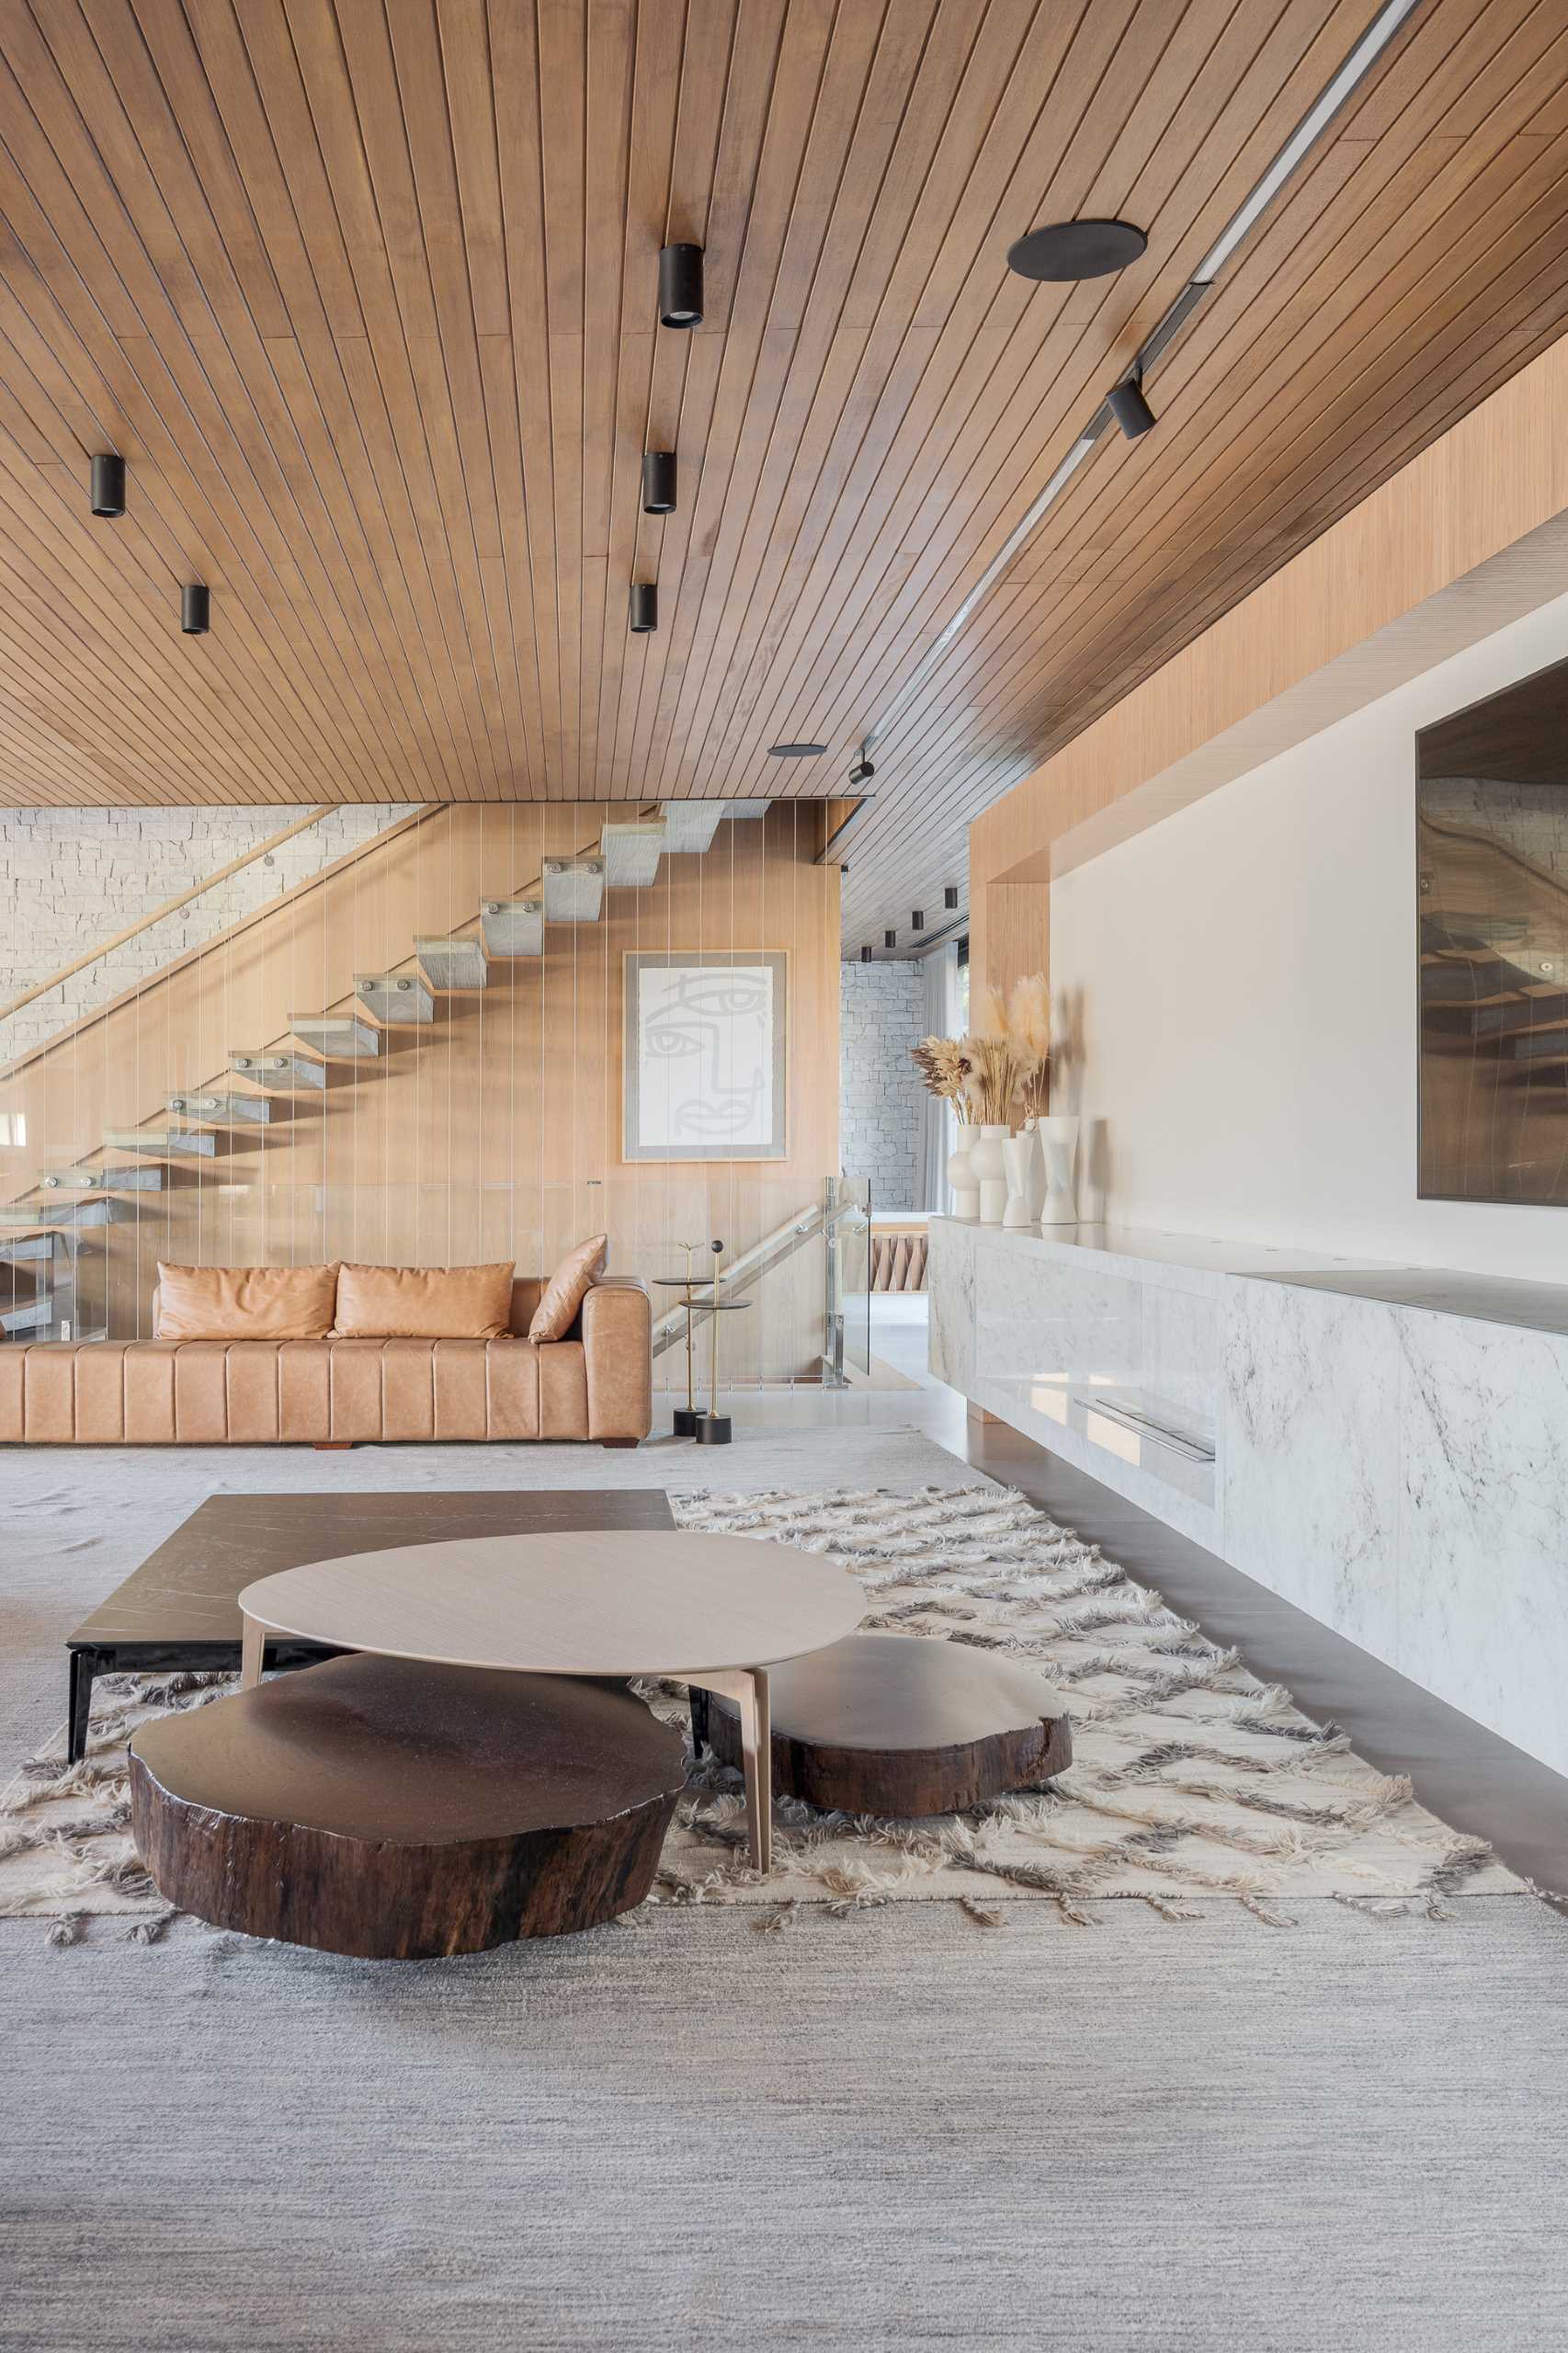 A wood ceiling is showcased throughout the home, while the living room includes an L-shaped couch as well as a secondary couch by the stairs.